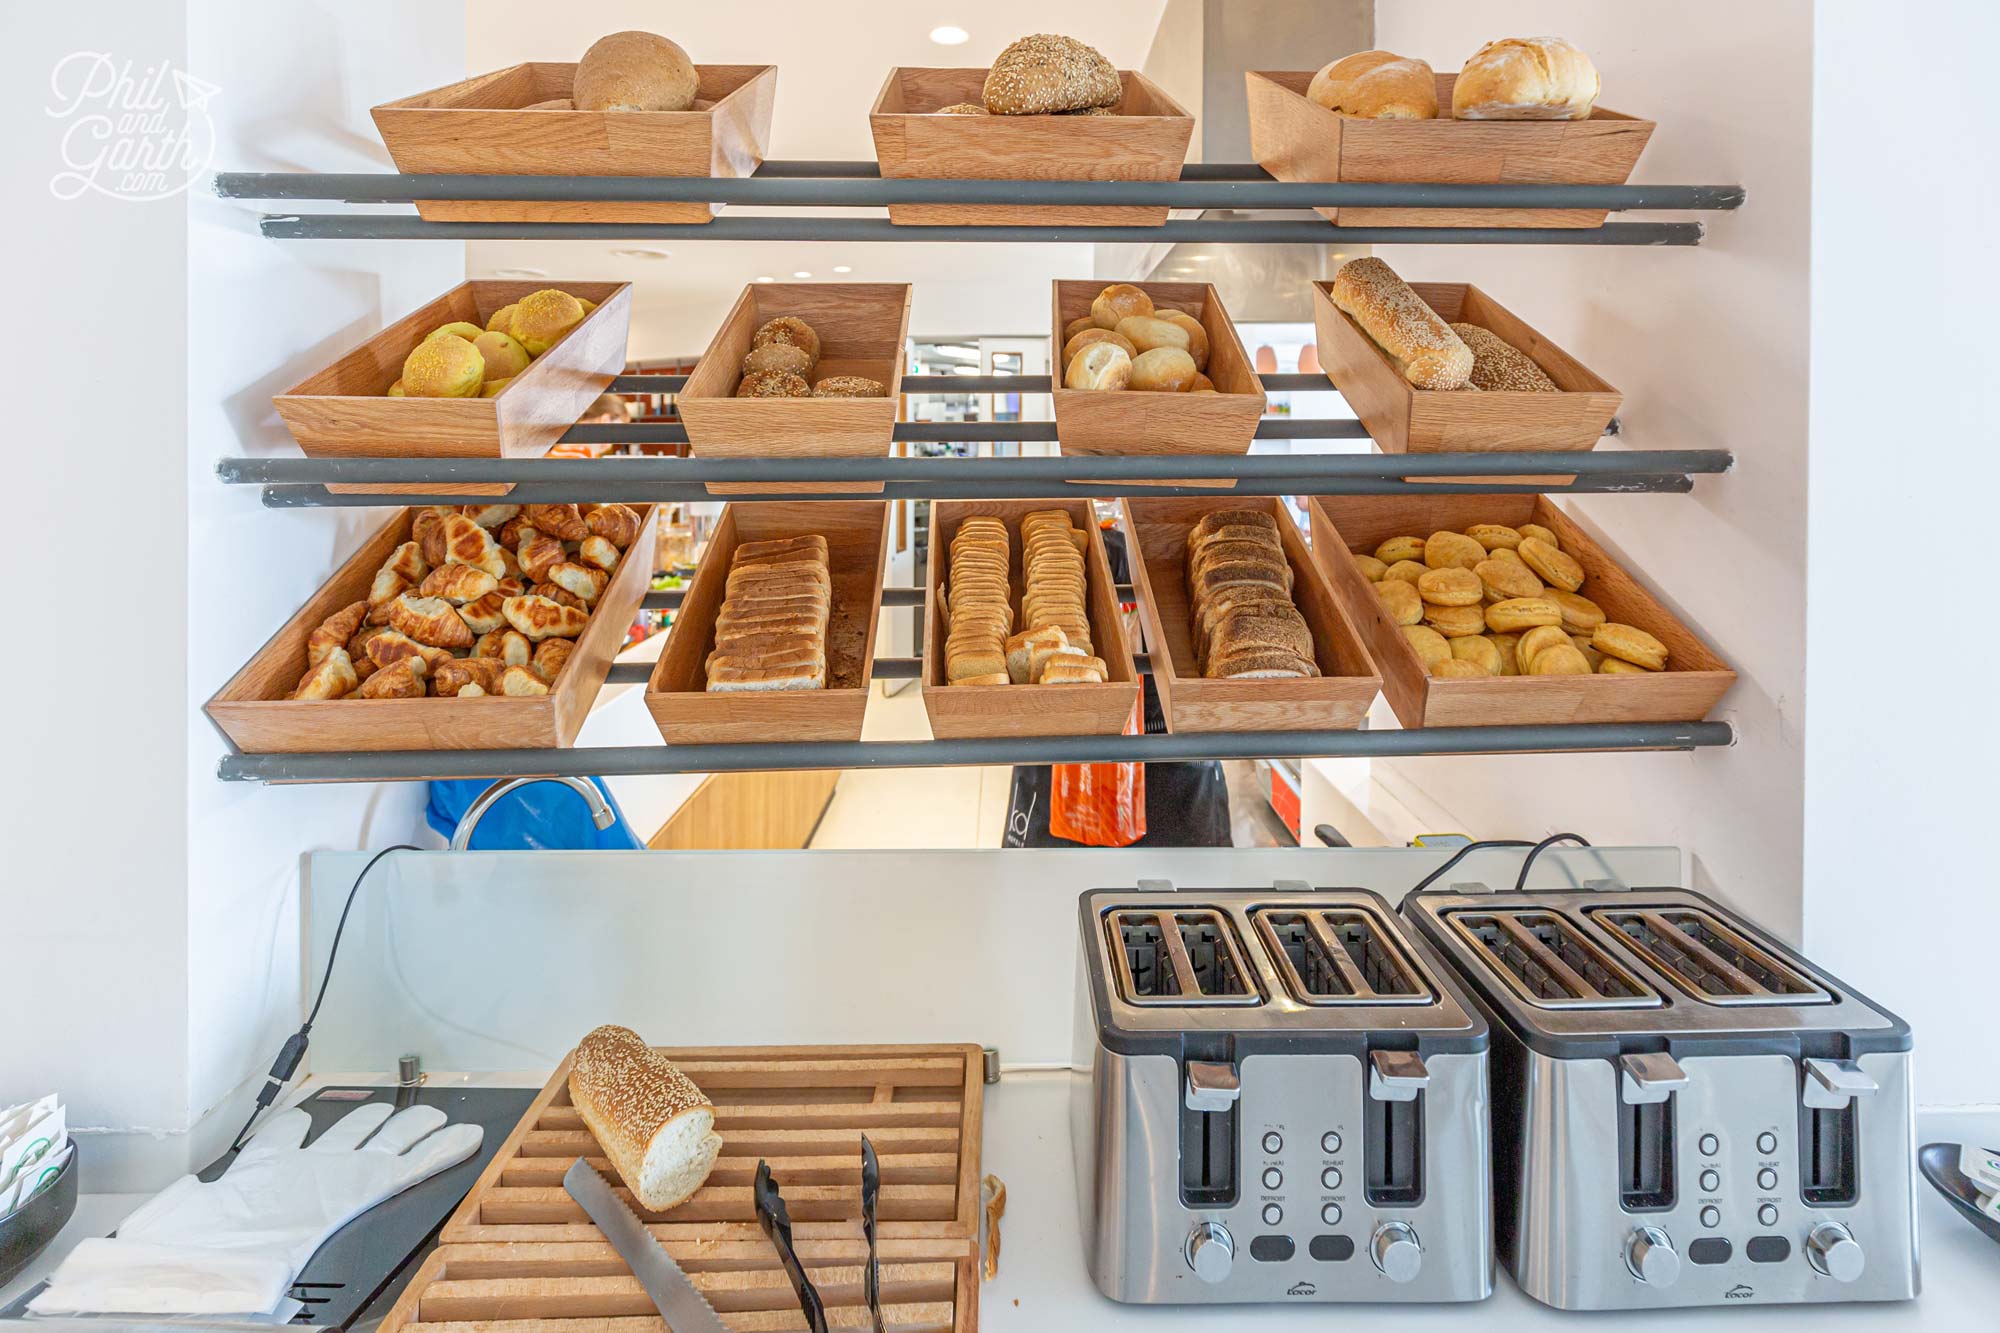 Lots of bread and no conveyor belt toasters!